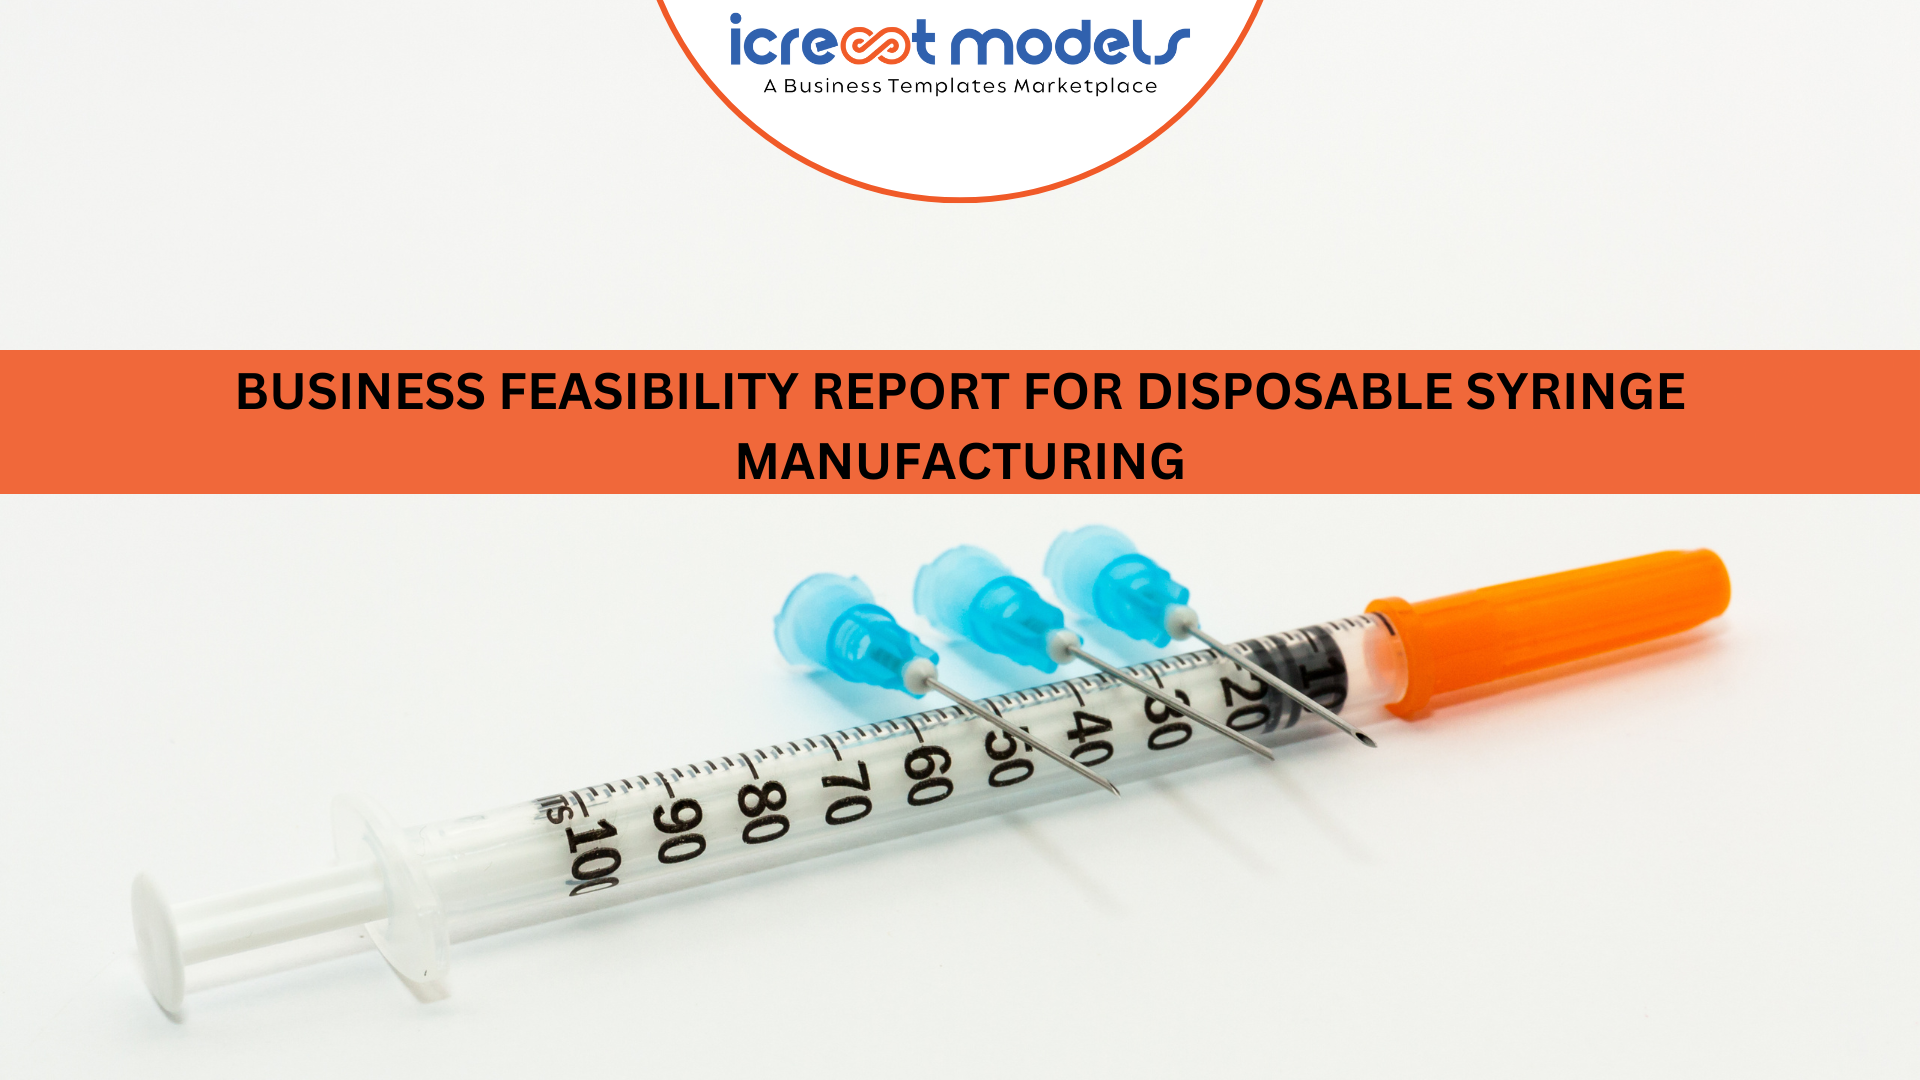 BUSINESS FEASIBILITY REPORT FOR DISPOSABLE SYRINGE MANUFACTURING